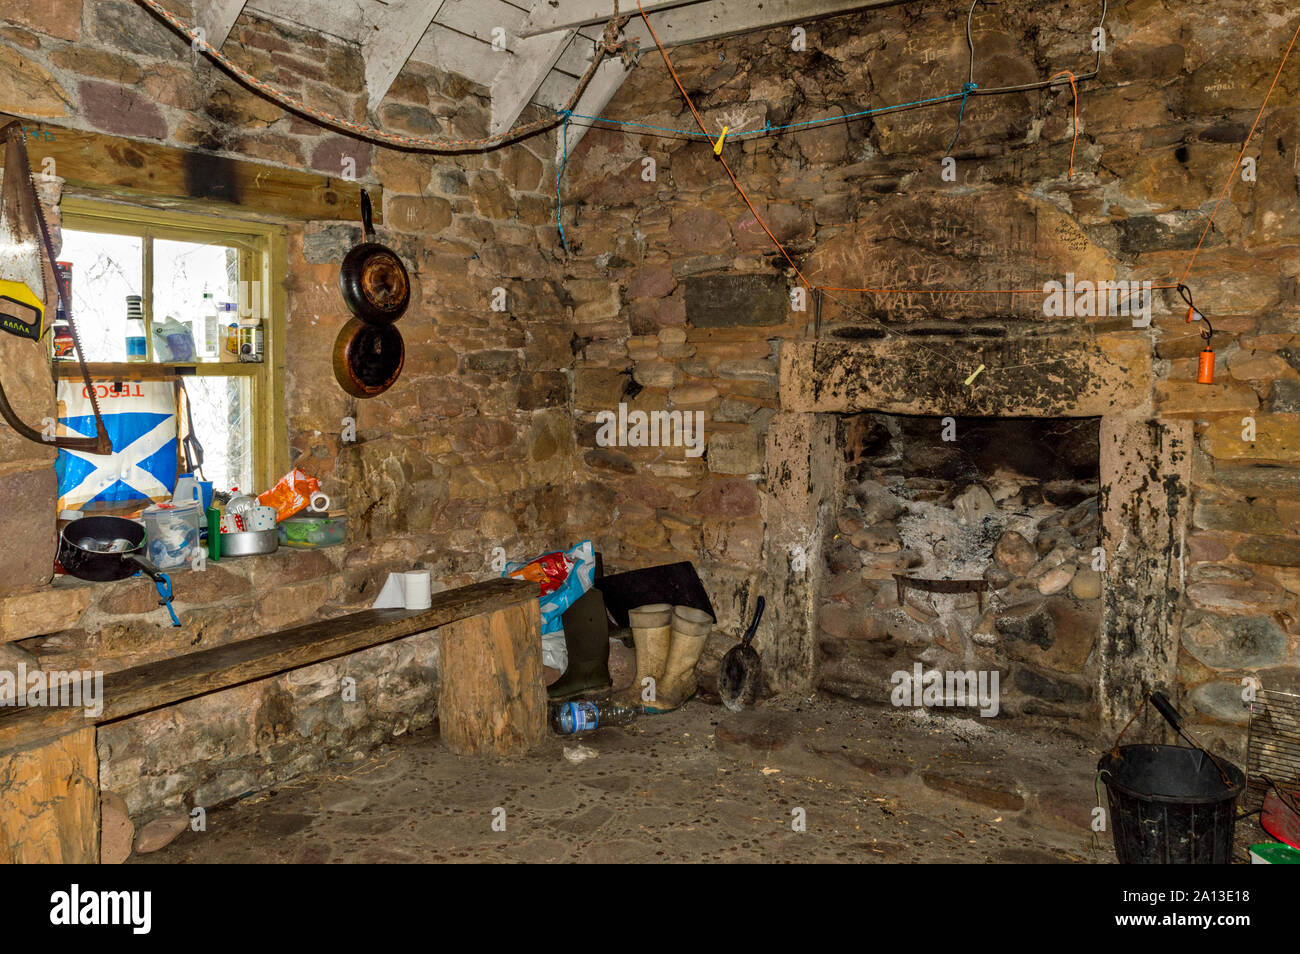 ROSEMARKIE TO CROMARTY WALK BLACK ISLE SCOTLAND INTERIOR OLD STONE BOTHY A REFUGE WITH A FIREPLACE AND COOKING UTENSILS Stock Photo